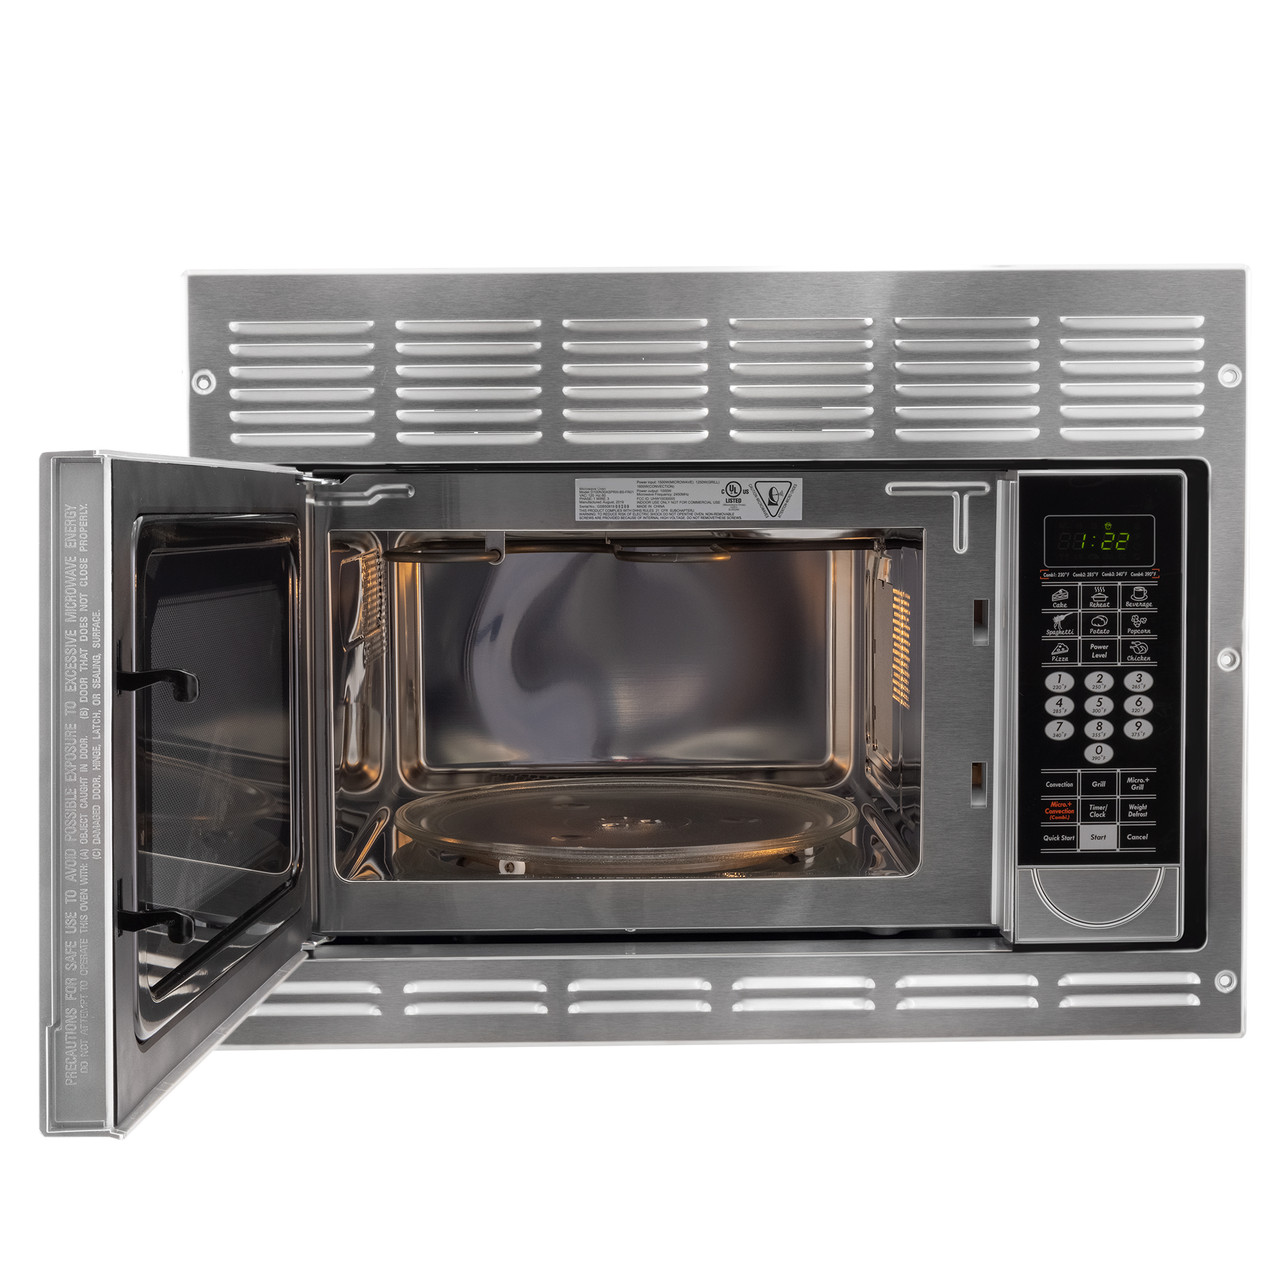 GE Profile RV 21 Cooktop Cover | Camping World